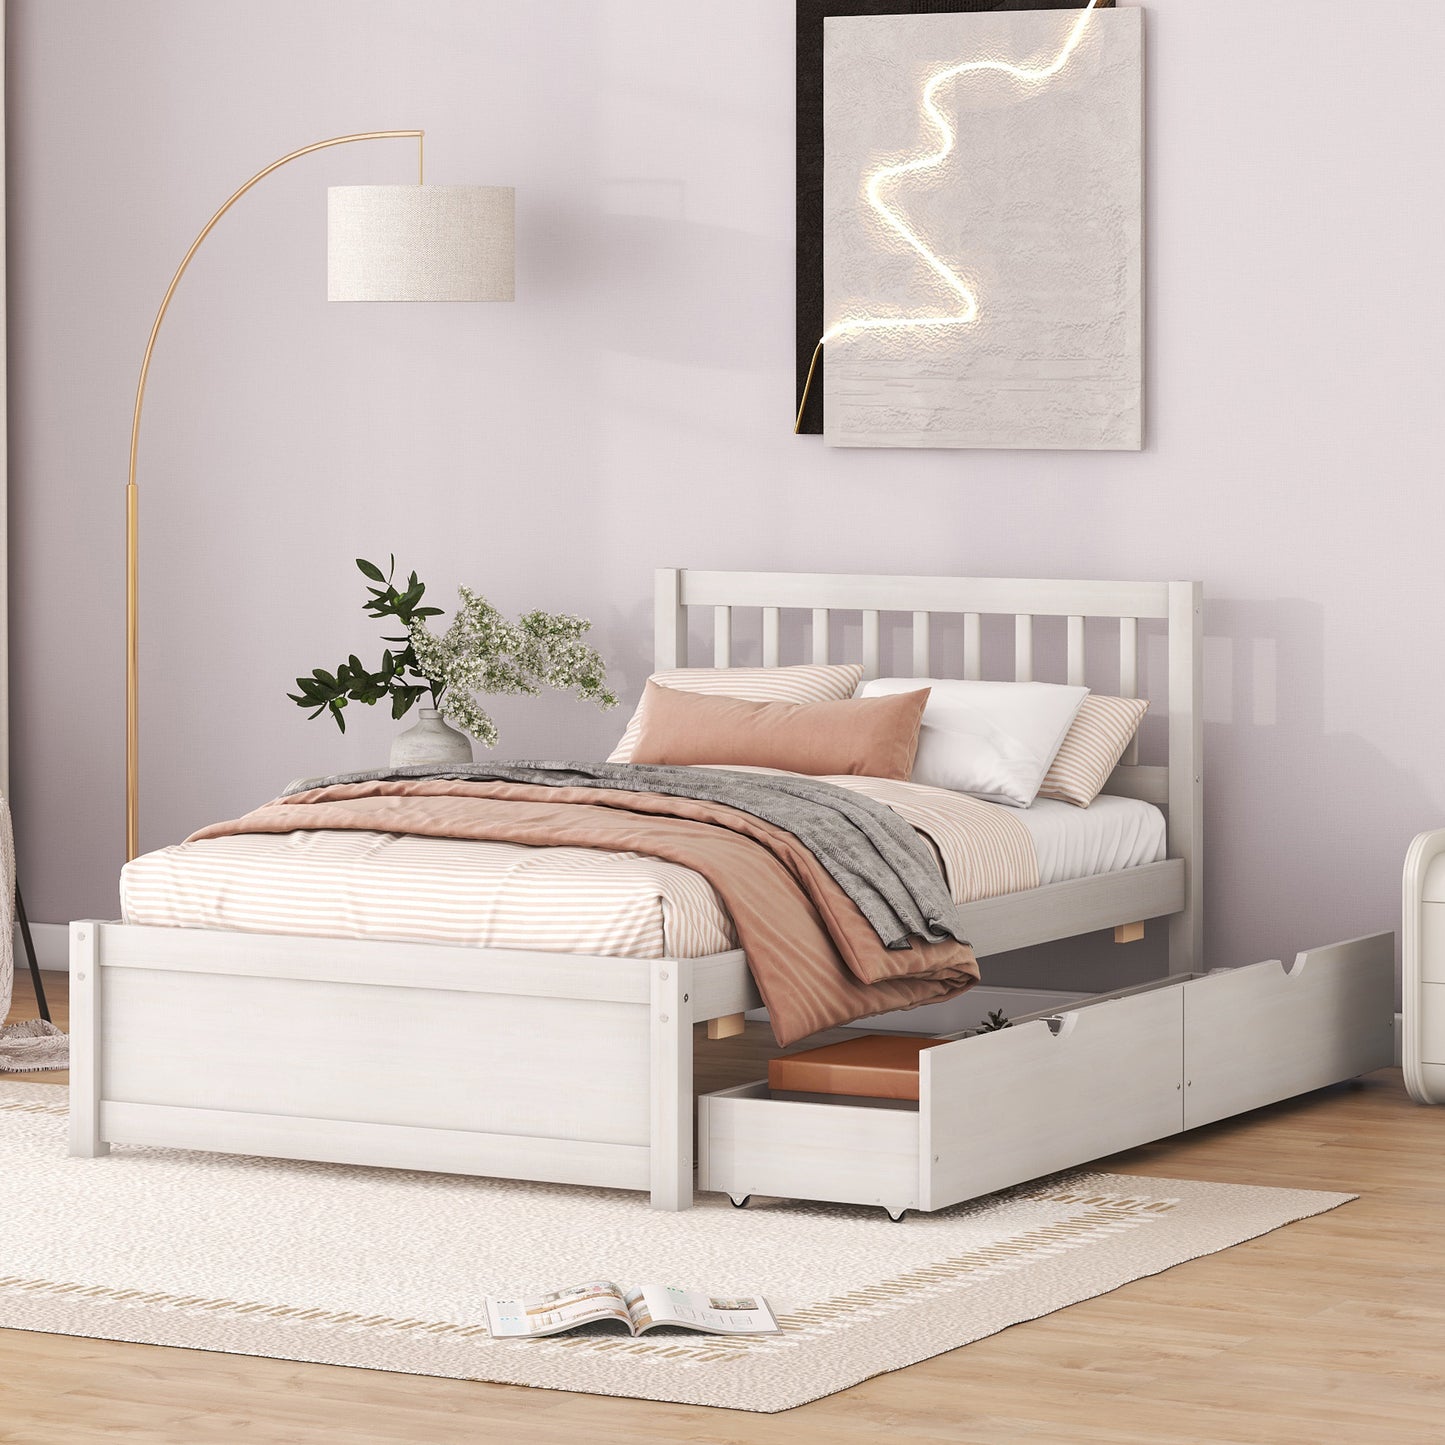 Modern Design Wooden Twin Size Platform Bed with 2 Drawers for White Washed Color